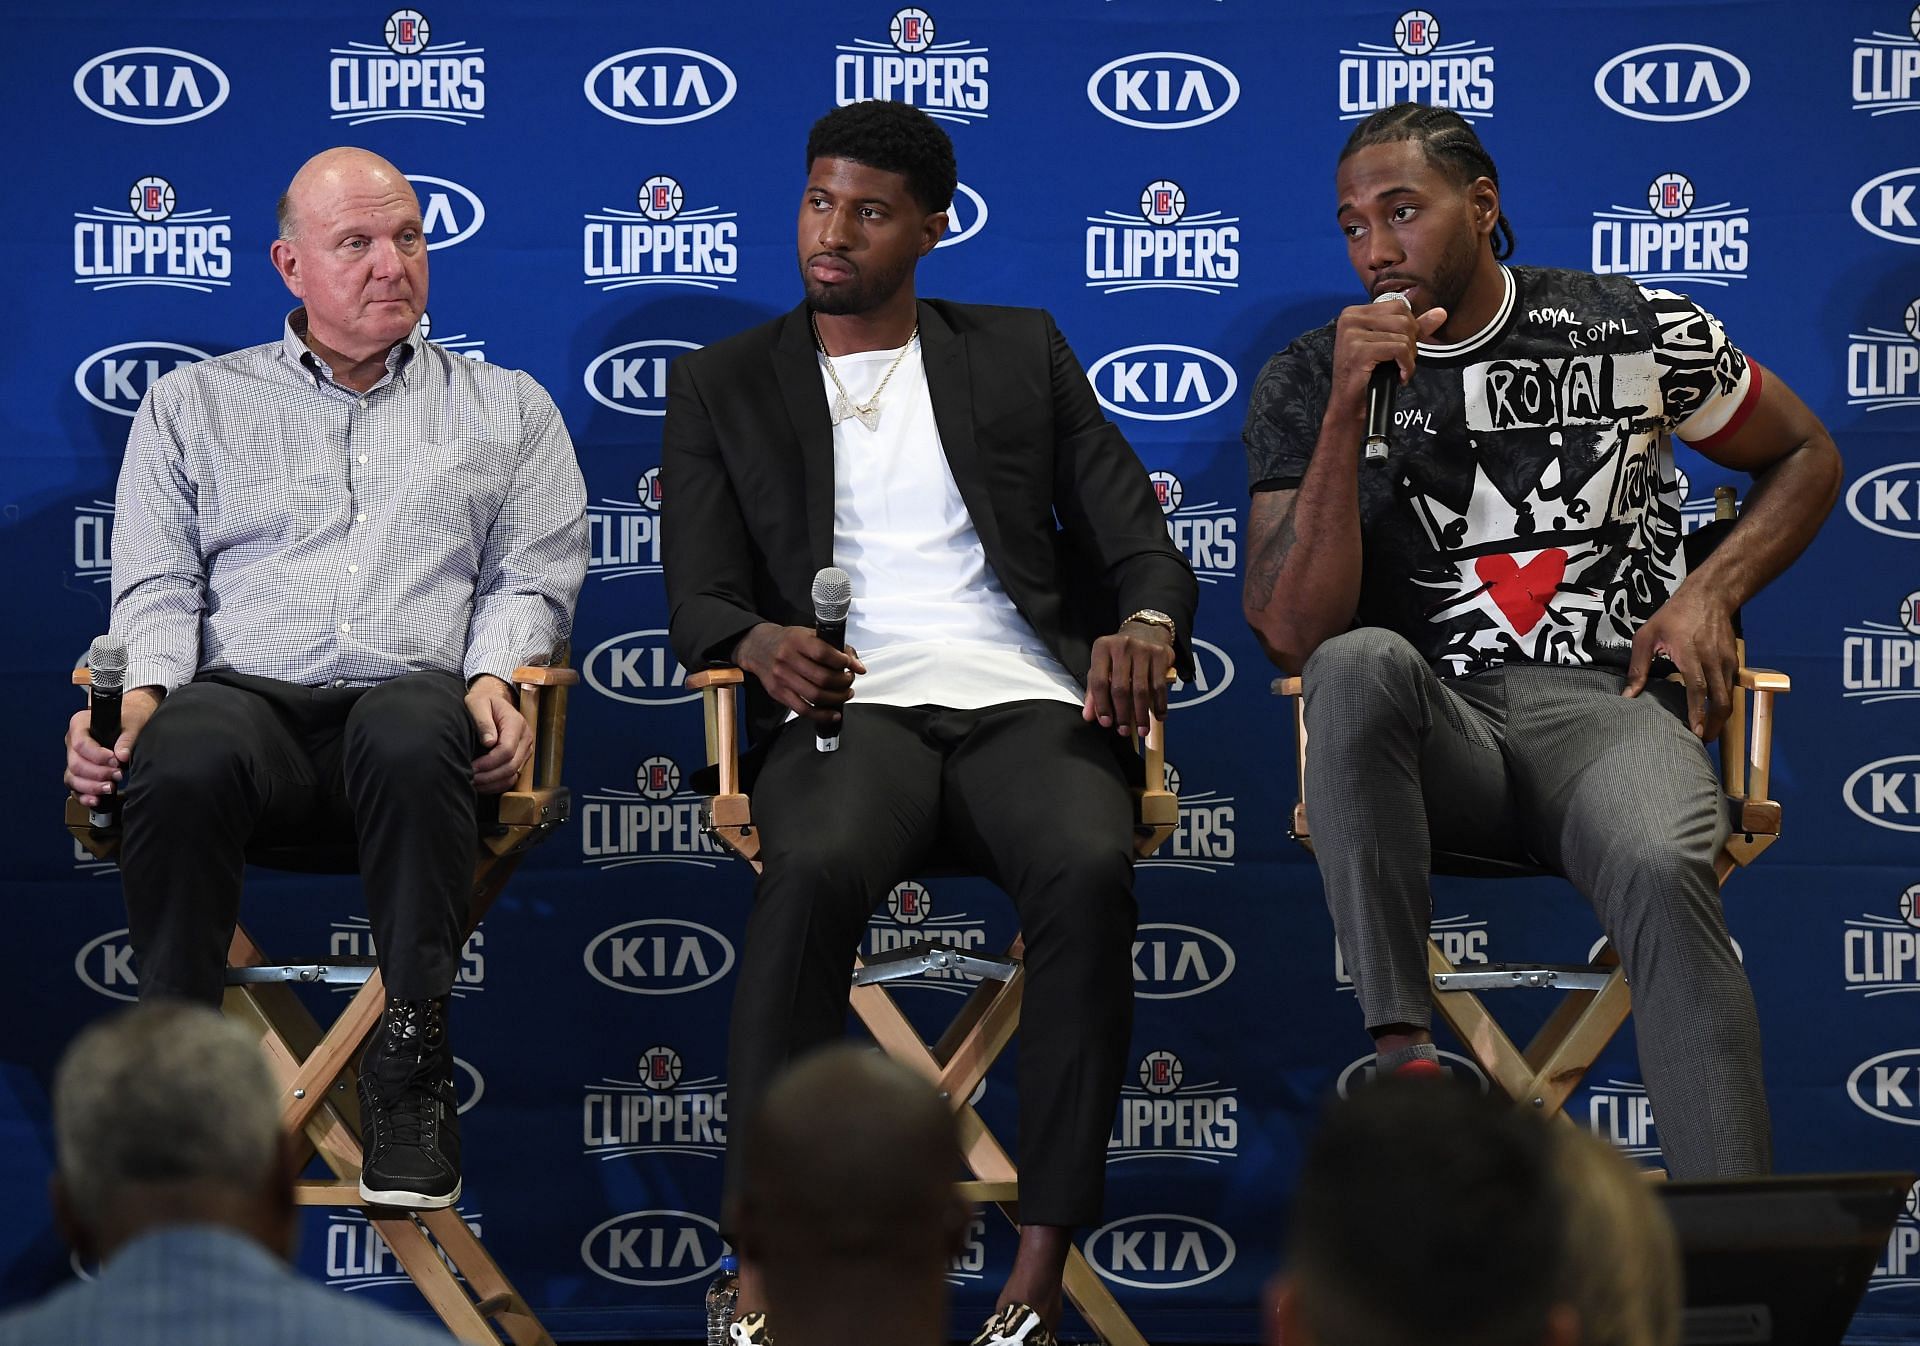 LA Clippers owner Steve Ballmer introduces Kawhi Leonard and Paul George in 2019